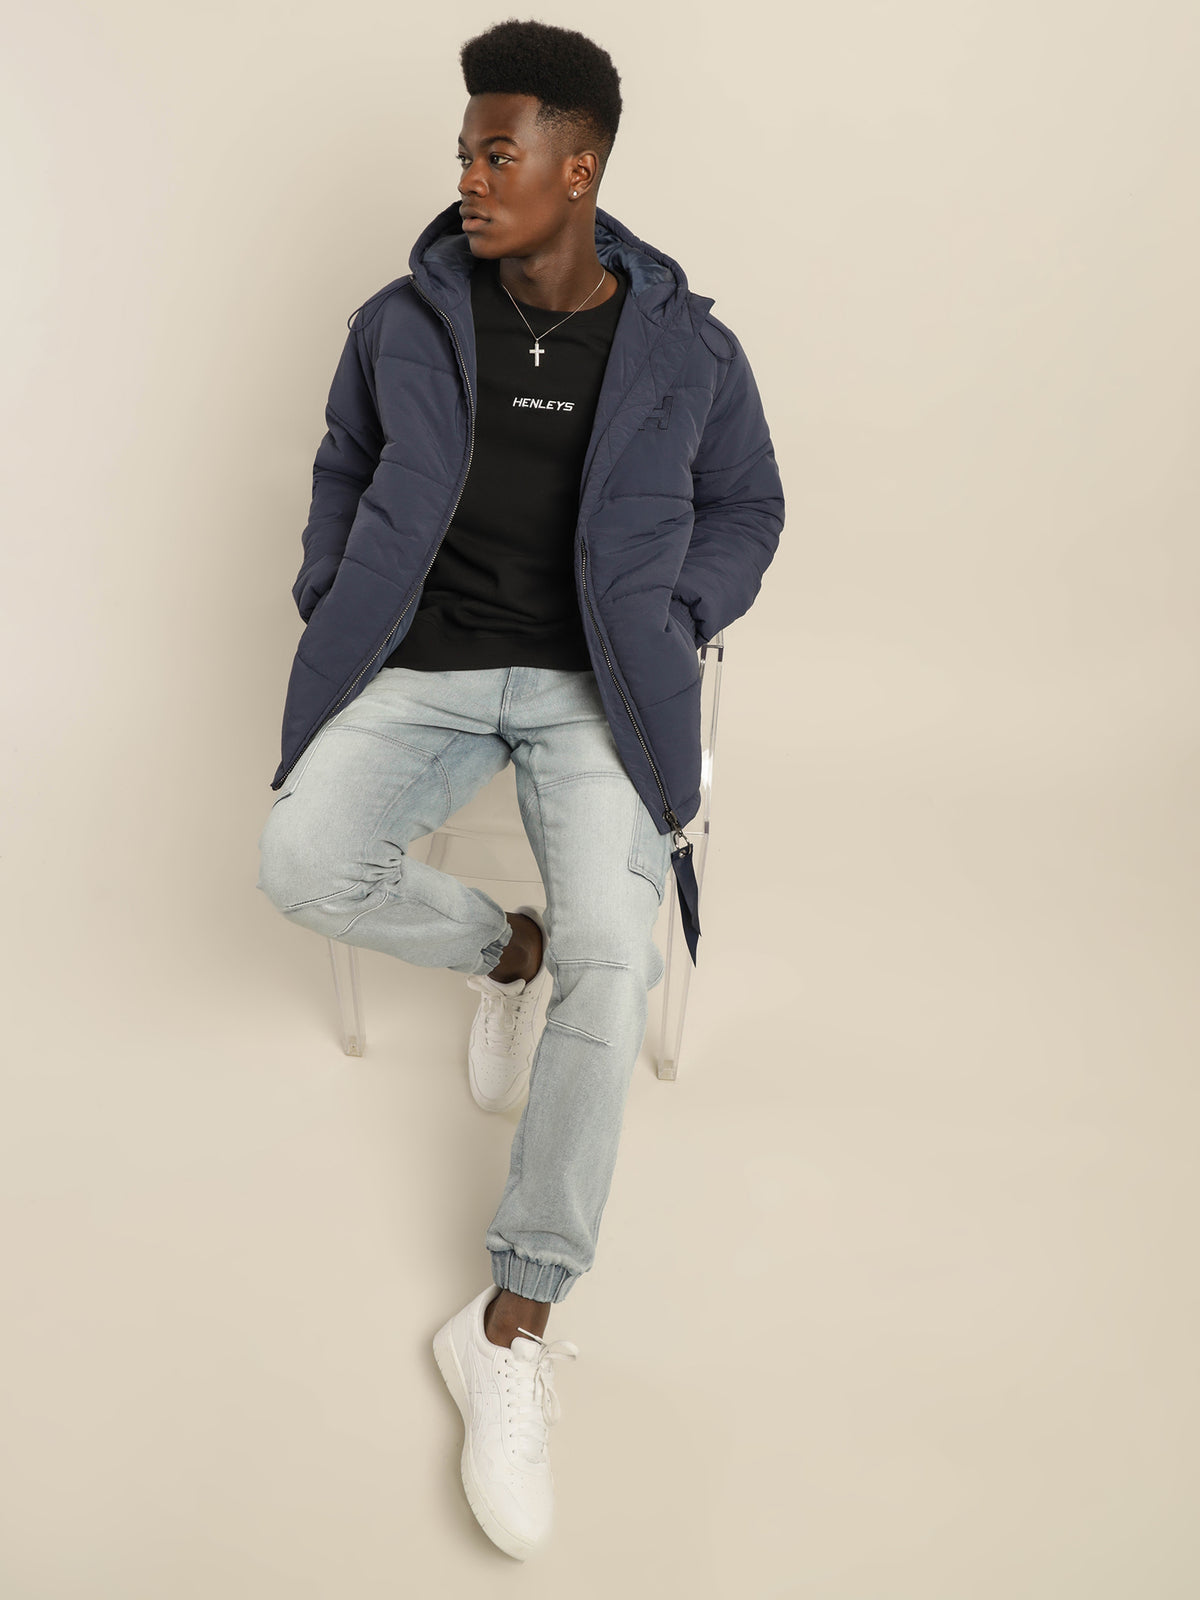 Overdrive Hooded Puffer Jacket in Navy